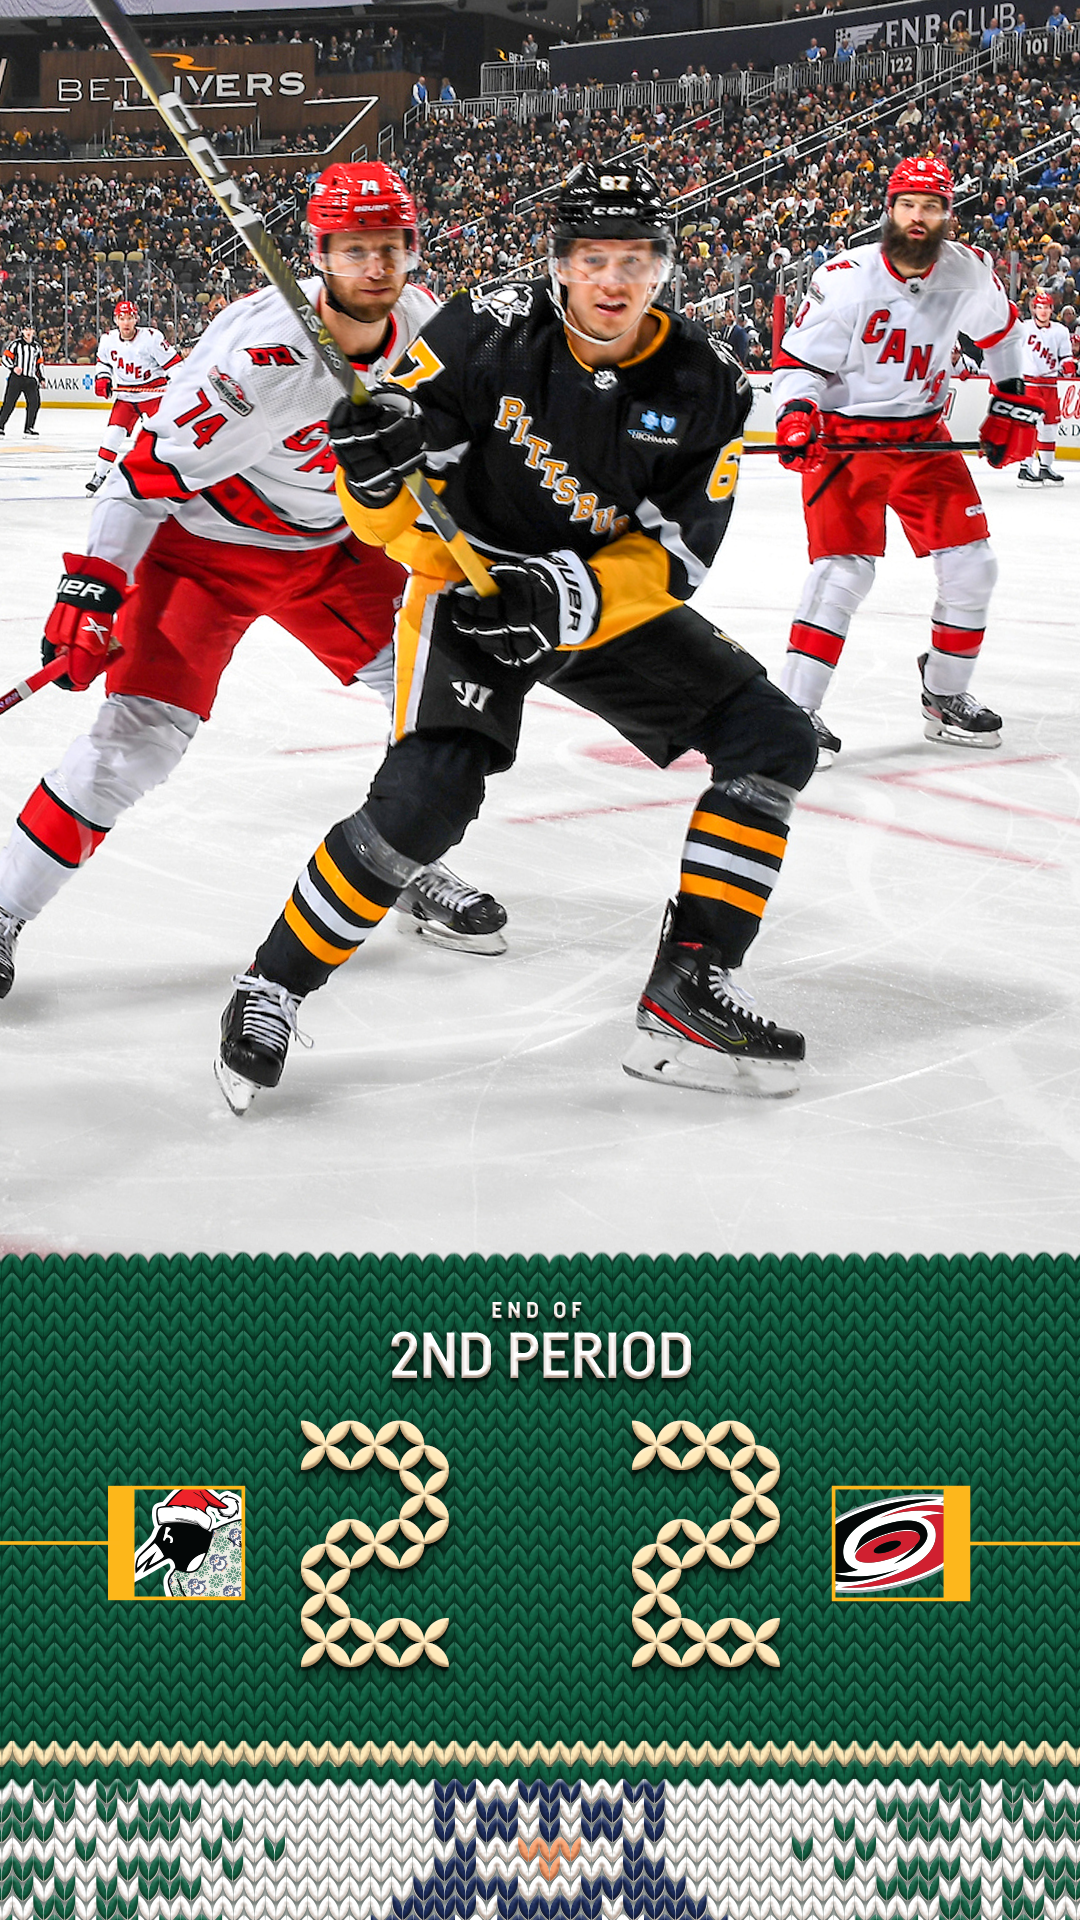 Score_Ugly_2Period_9x16.png